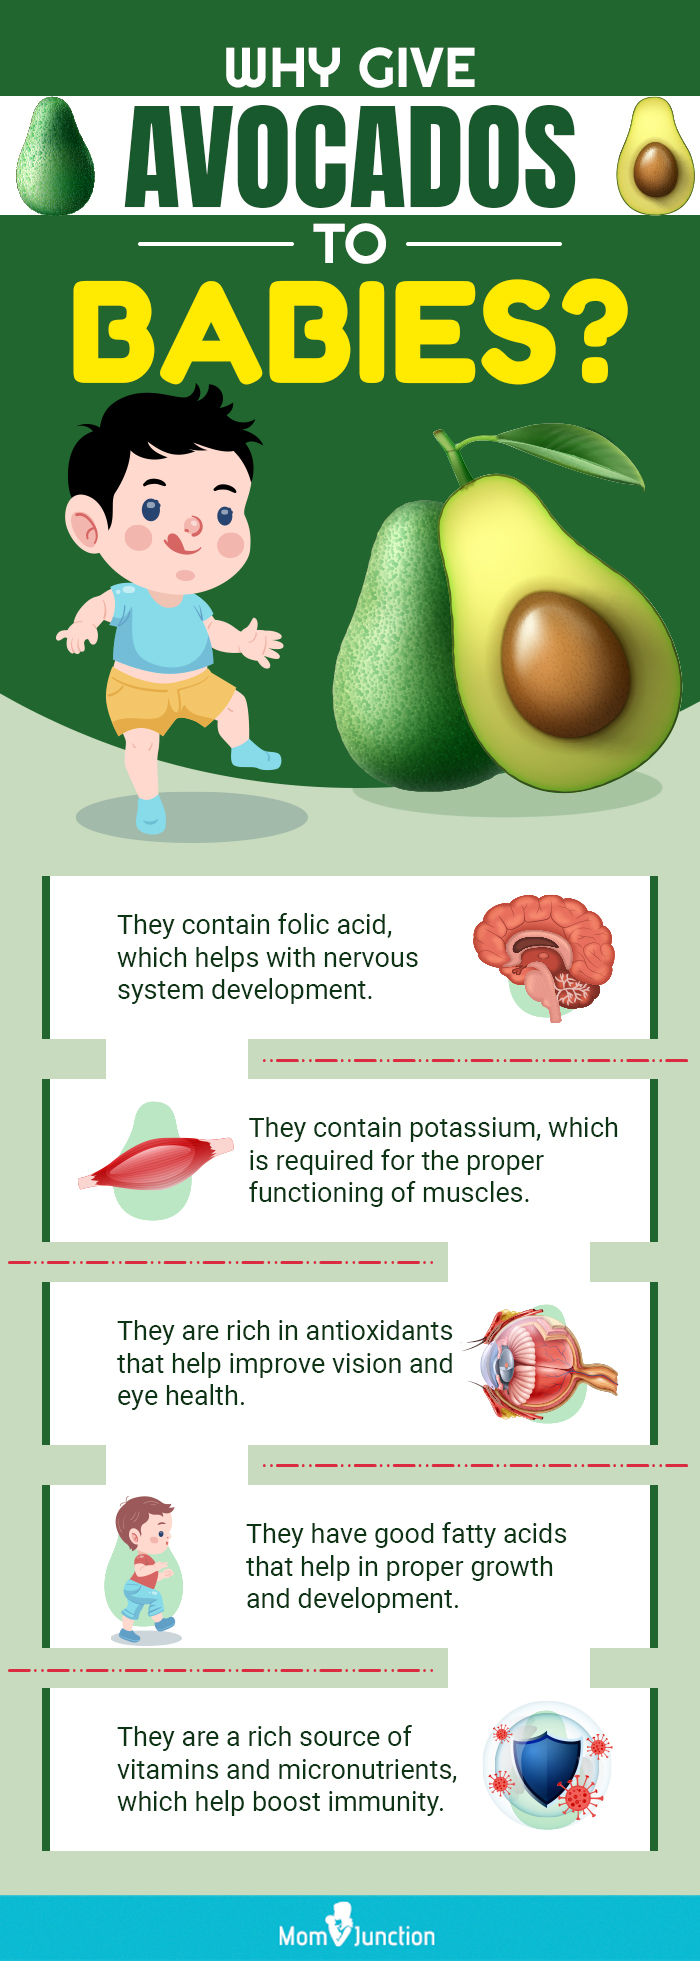 https://cdn2.momjunction.com/wp-content/uploads/2022/12/Why-Give-Avocados-To-Babies.jpg